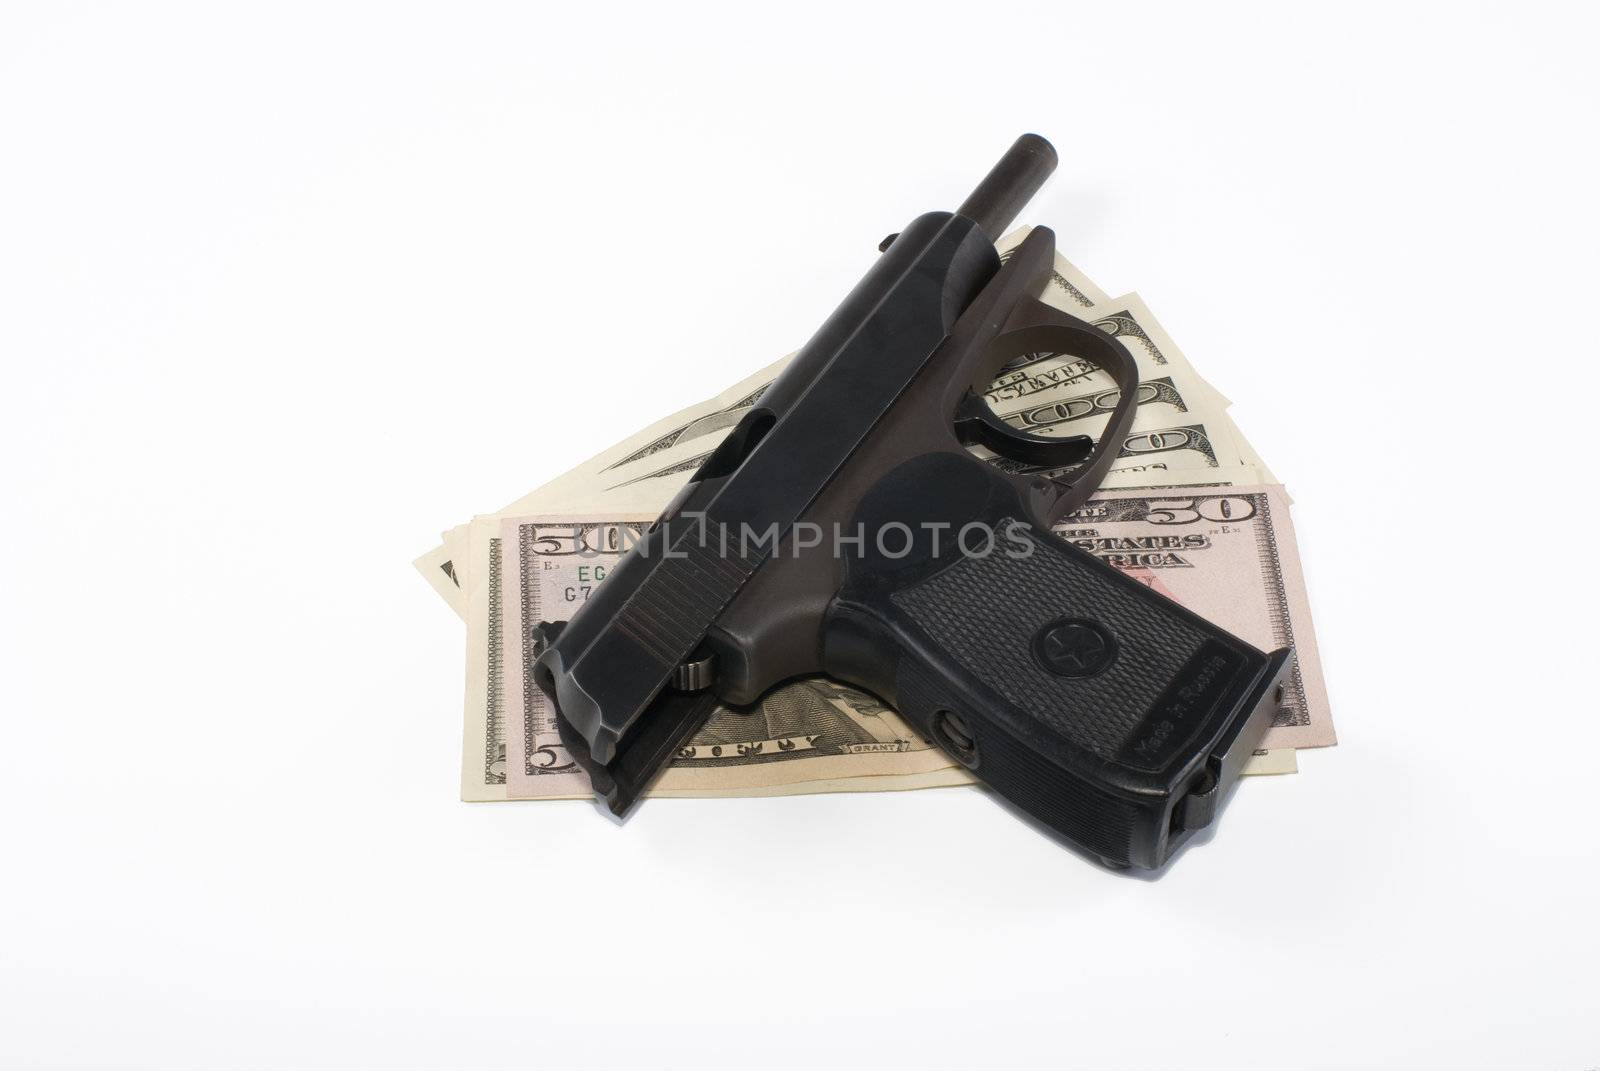 The pistol lays on dollar banknotes on a white background